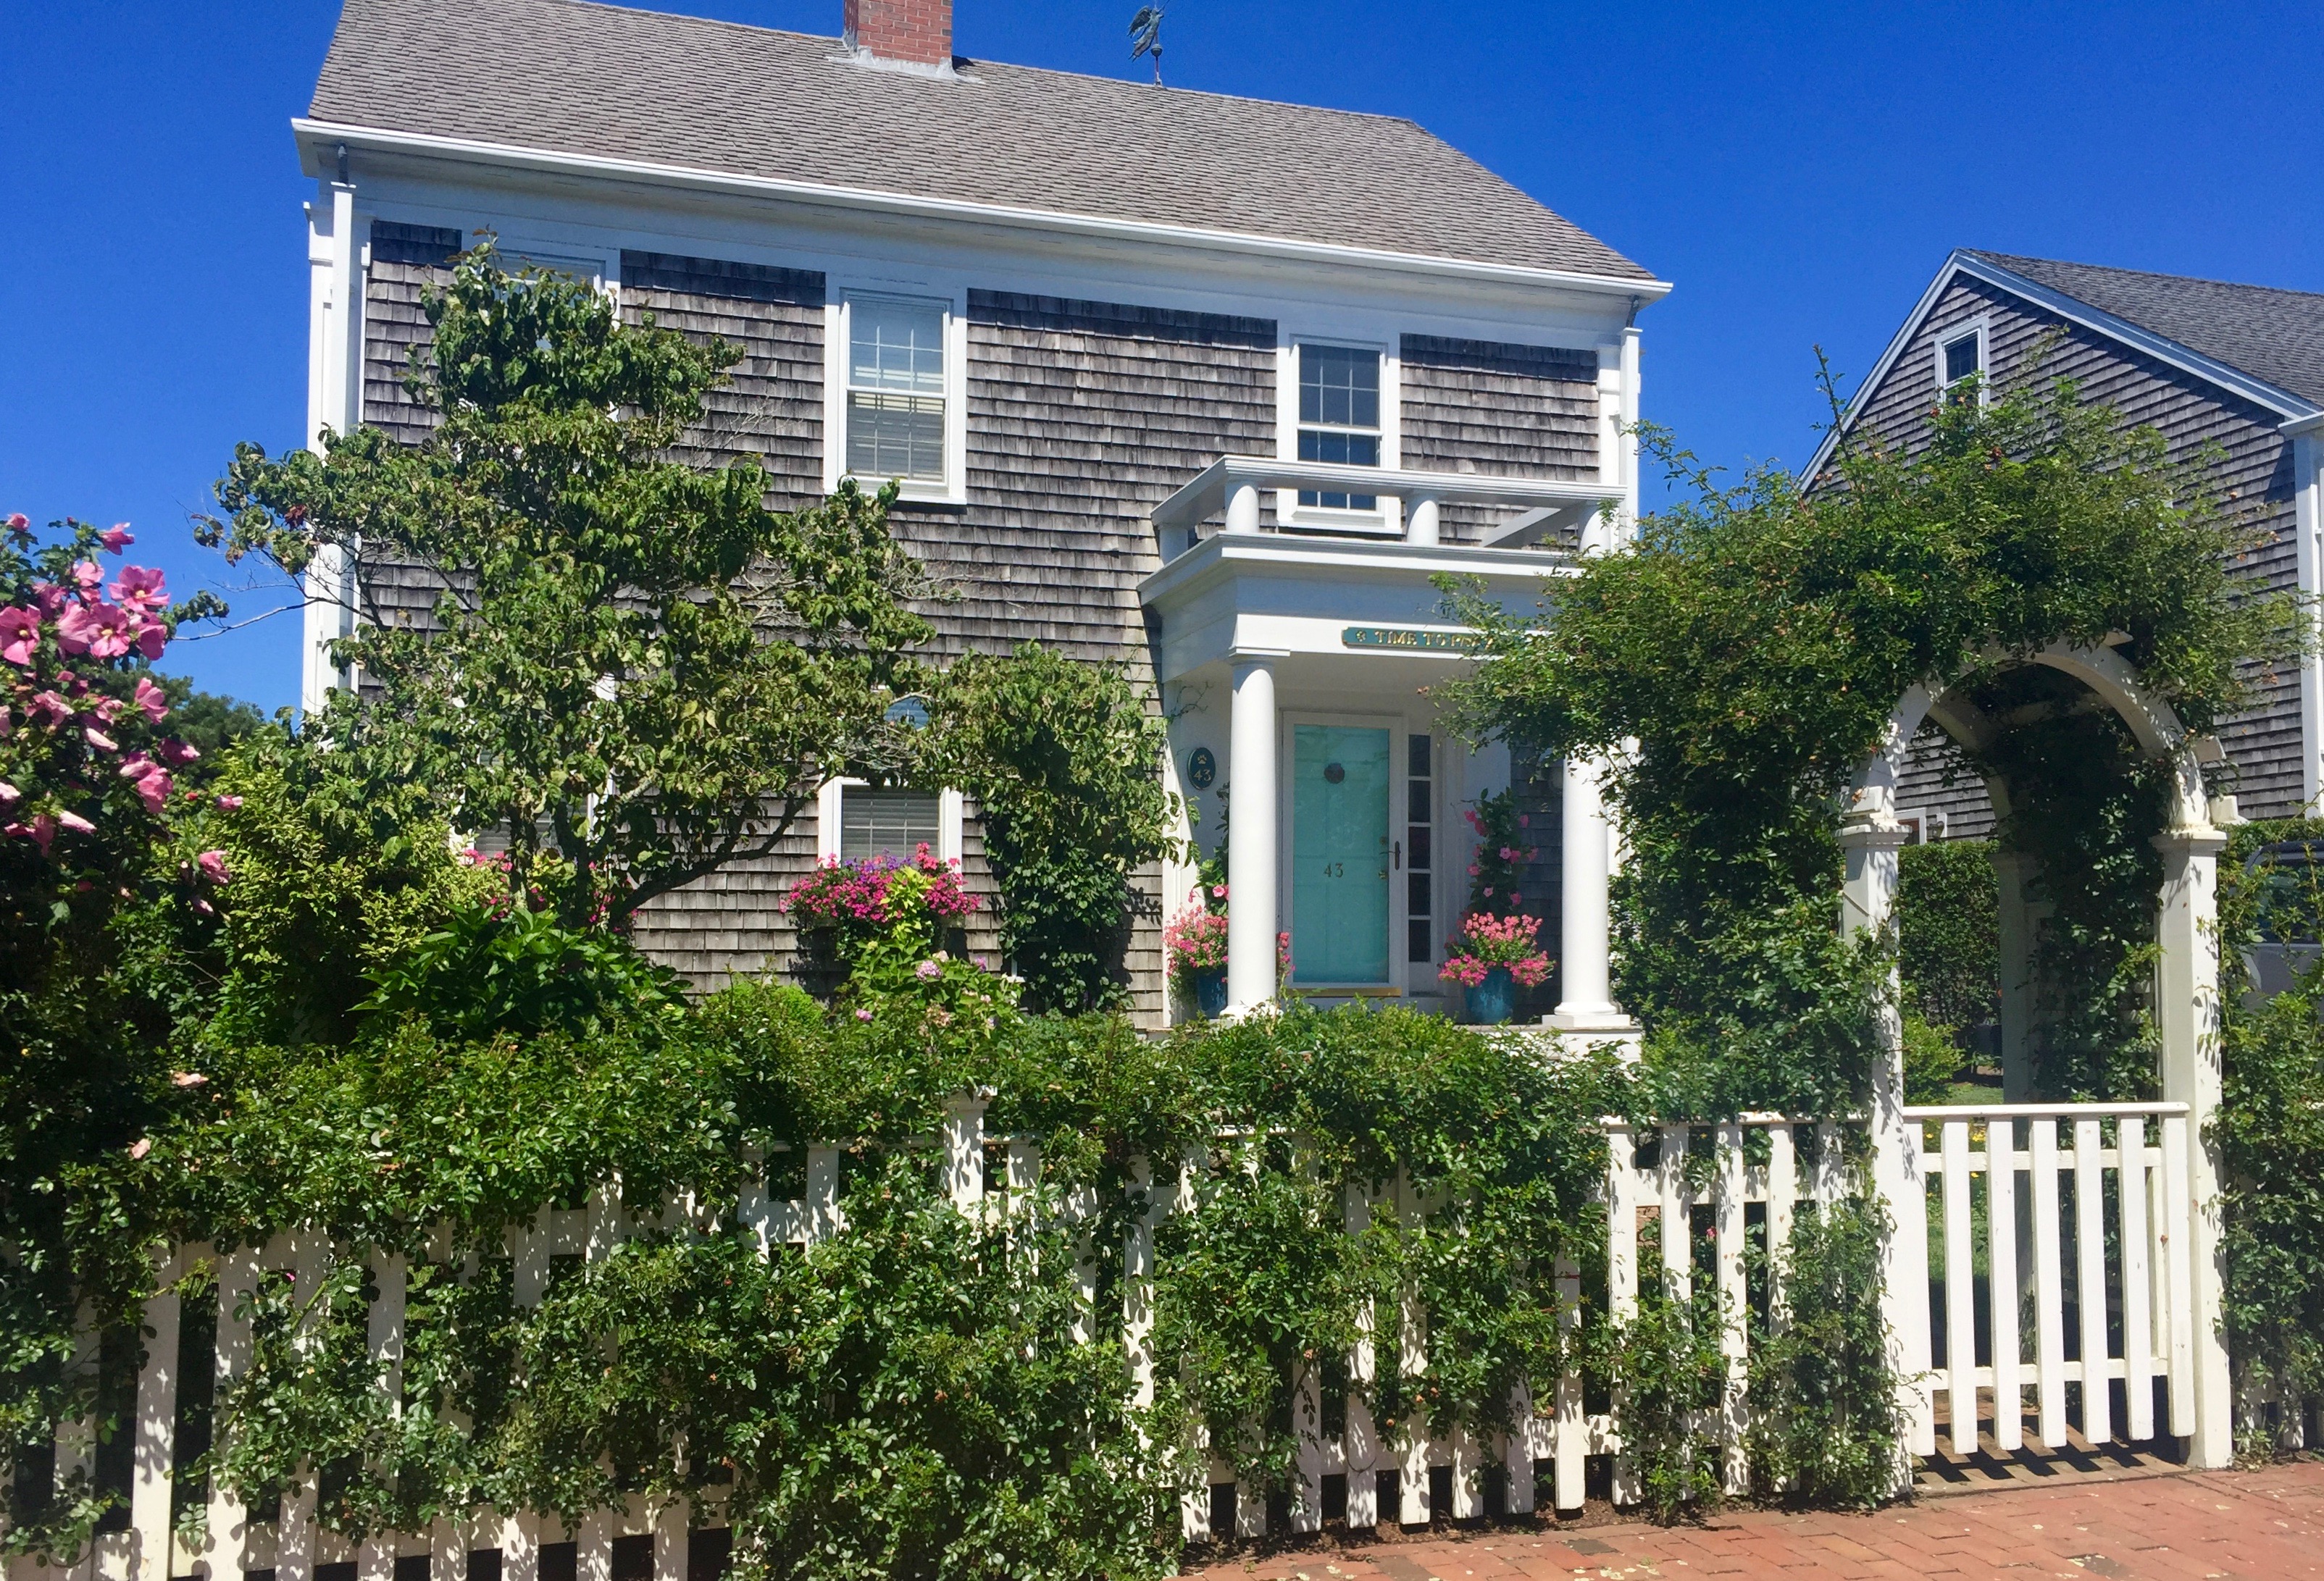 Nantucket by Christina Dandar for The Potted Boxwood